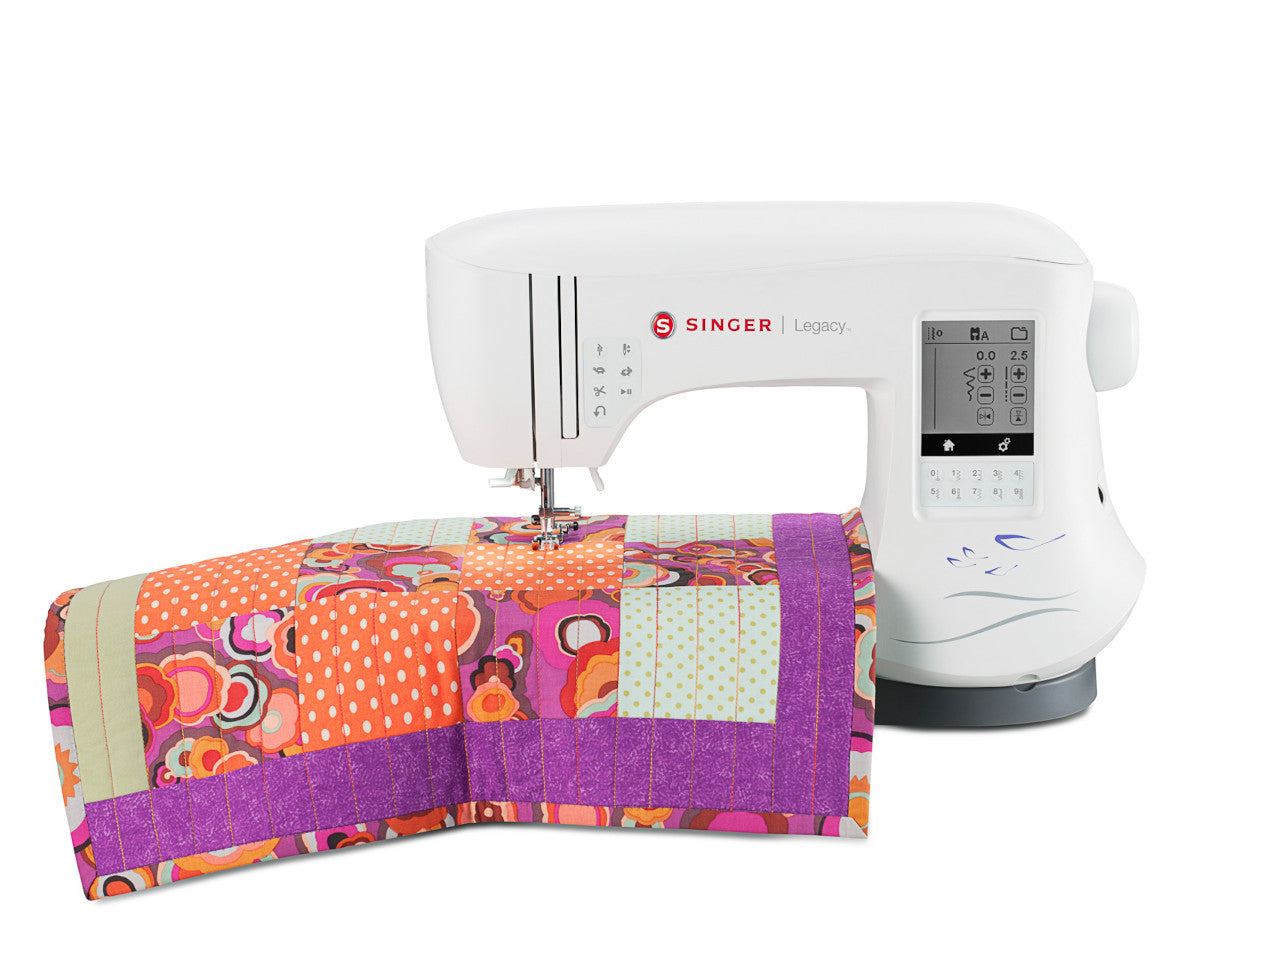 SE300-LEGACY-beauty-quilt-singer-sewing-machines